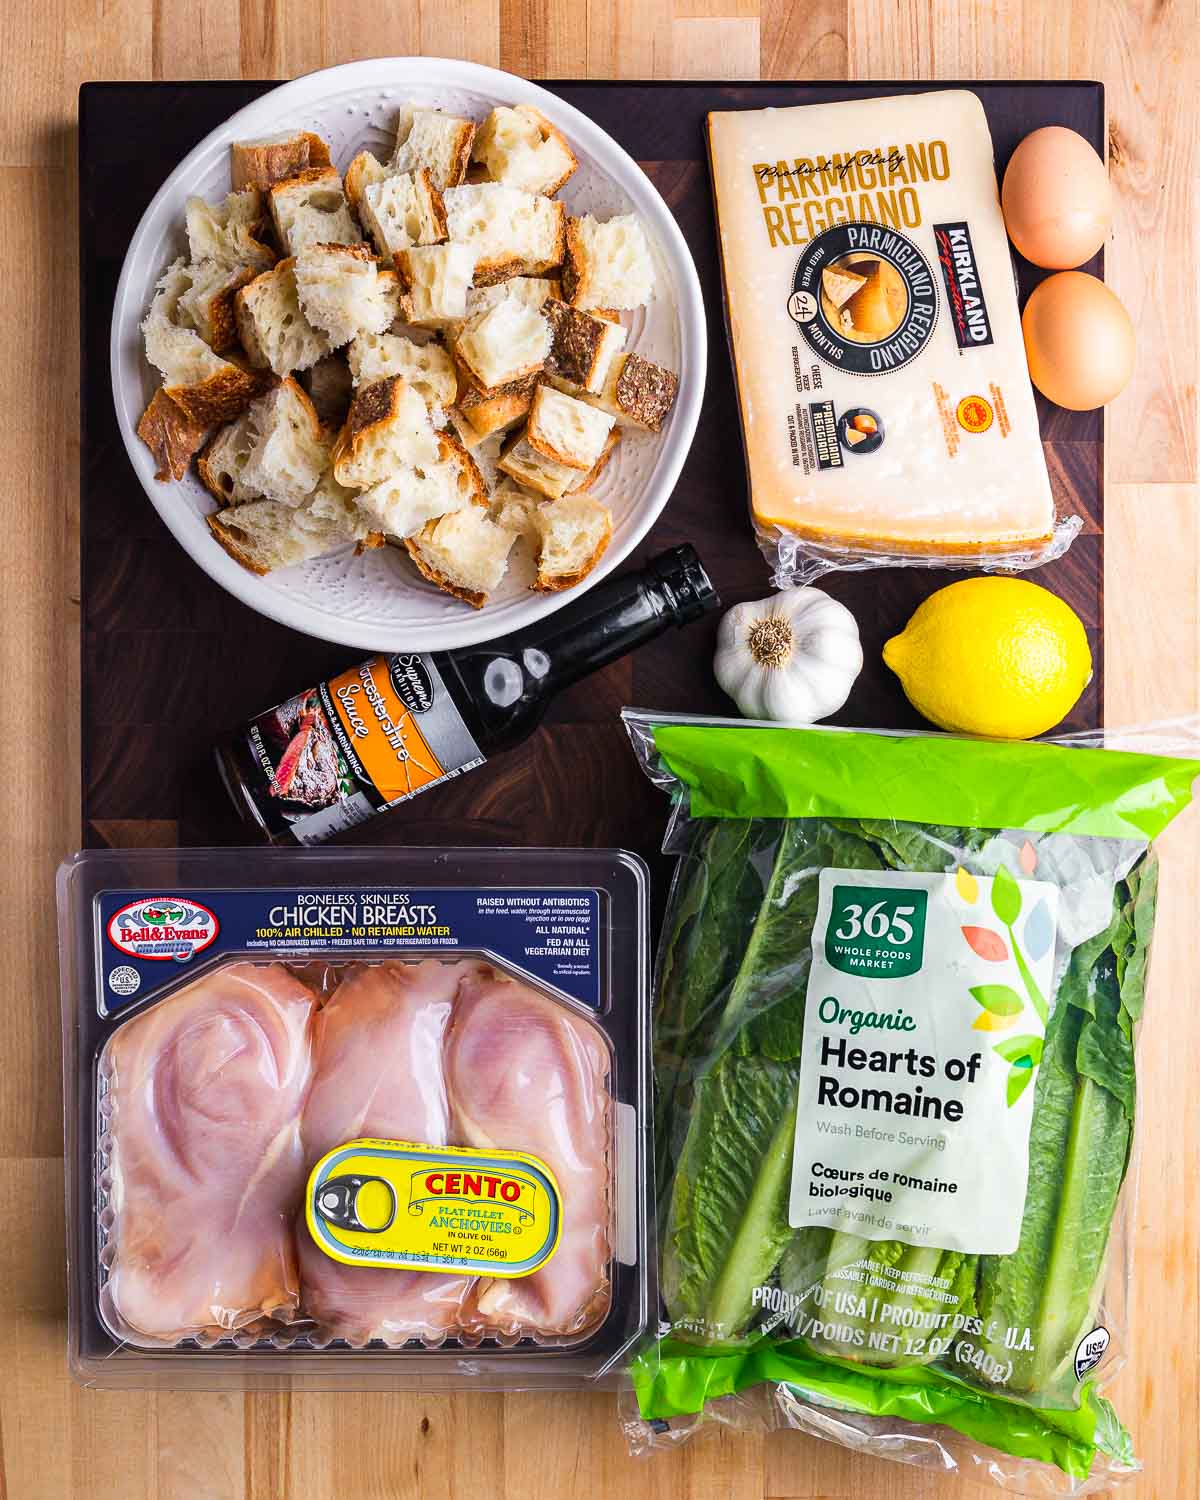 Ingredients shown: bread, parmesan, eggs, worcestershire, garlic, lemons, chicken breasts, anchovies, and romaine lettuce.